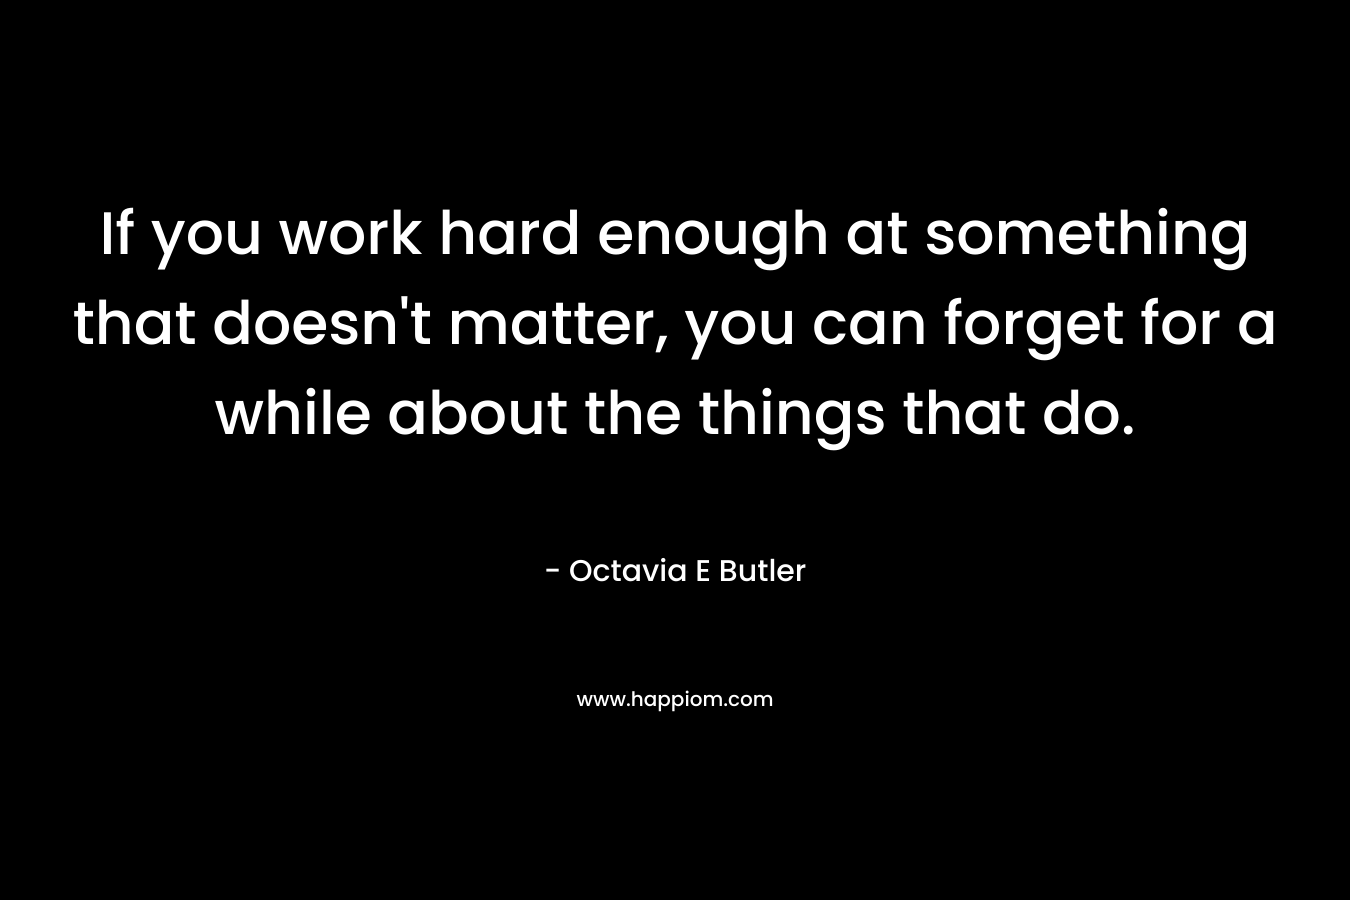 If you work hard enough at something that doesn't matter, you can forget for a while about the things that do.